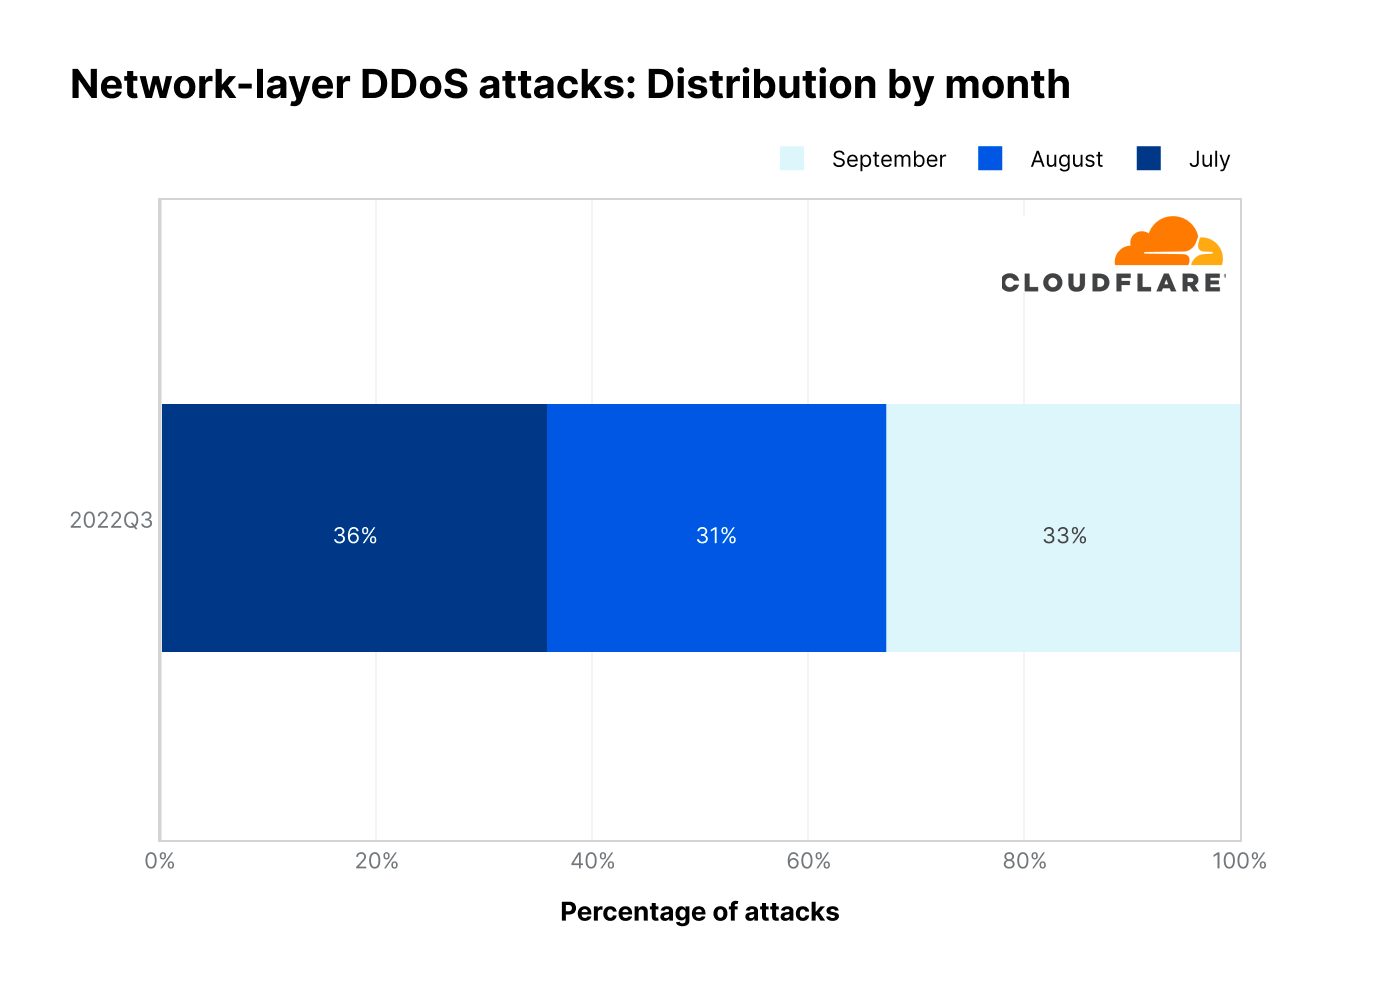 Graph of L3/4 DDoS attacks by month in 2022 Q3